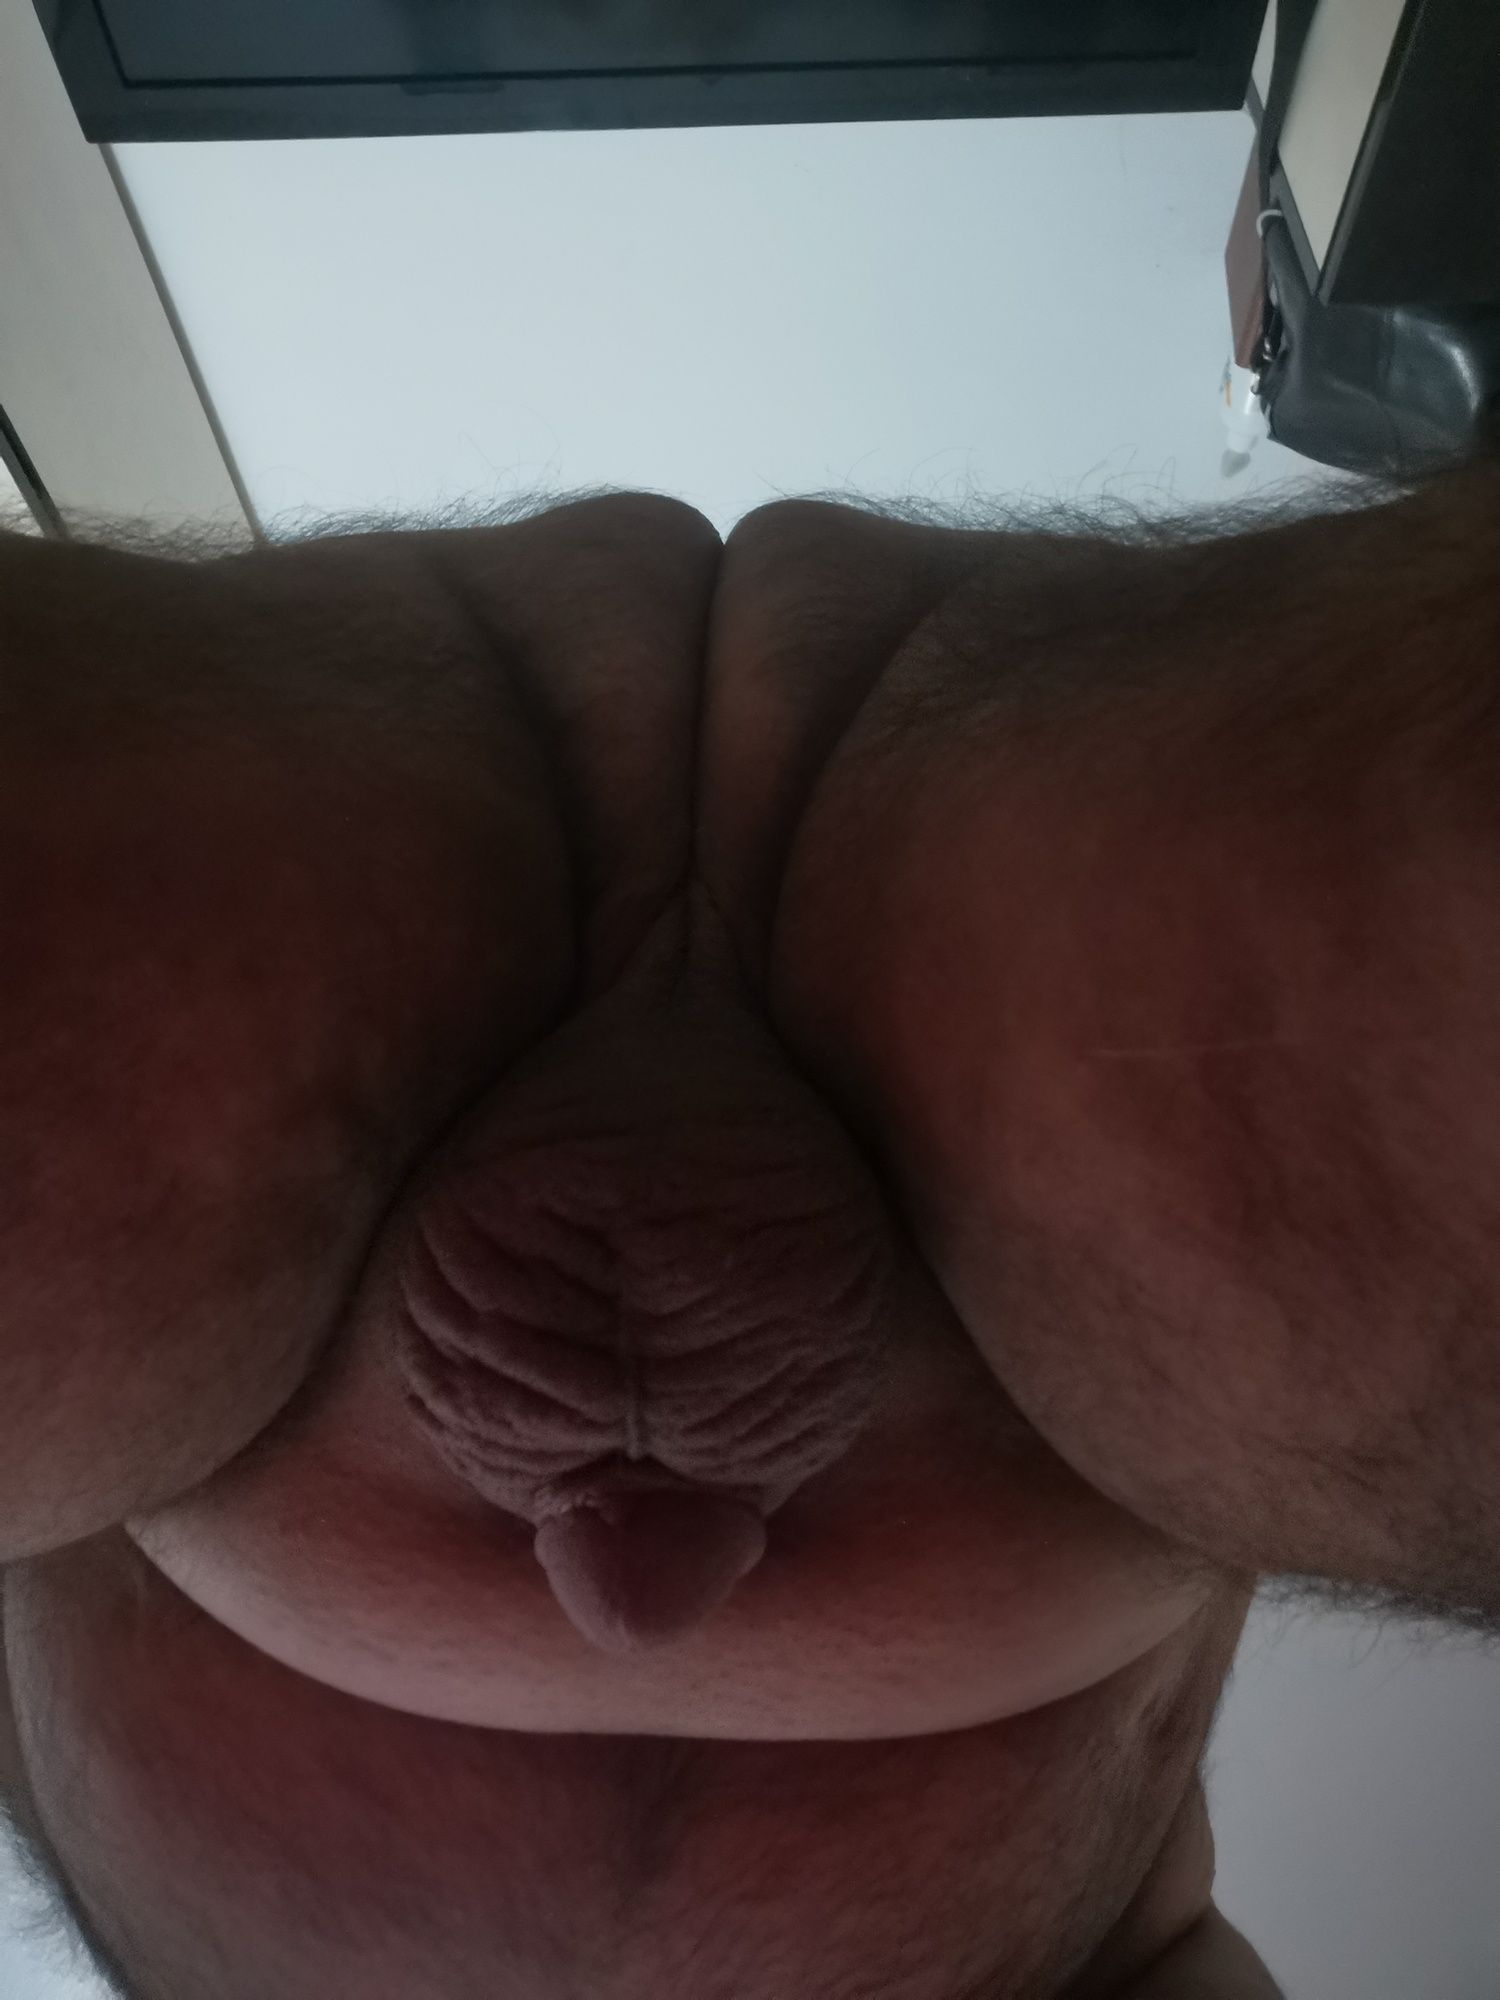 My small dick and ass #55